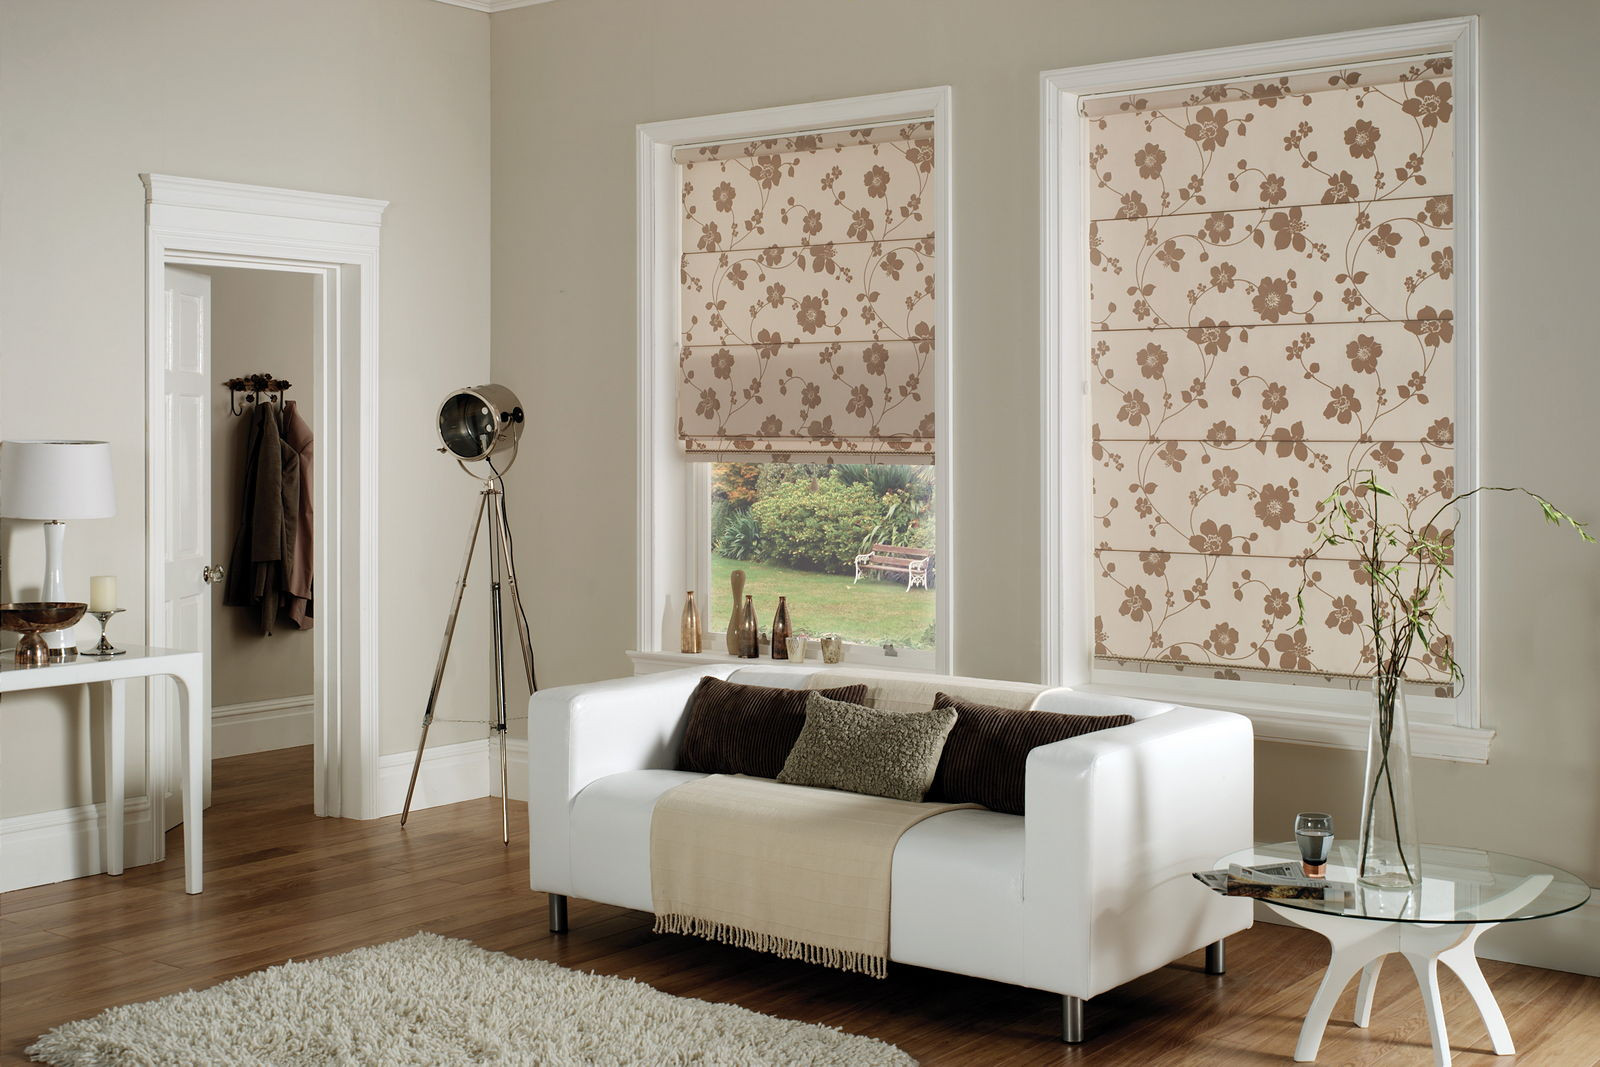 Living Room Curtain Designs
 Living Room Curtains the best photos of curtains design